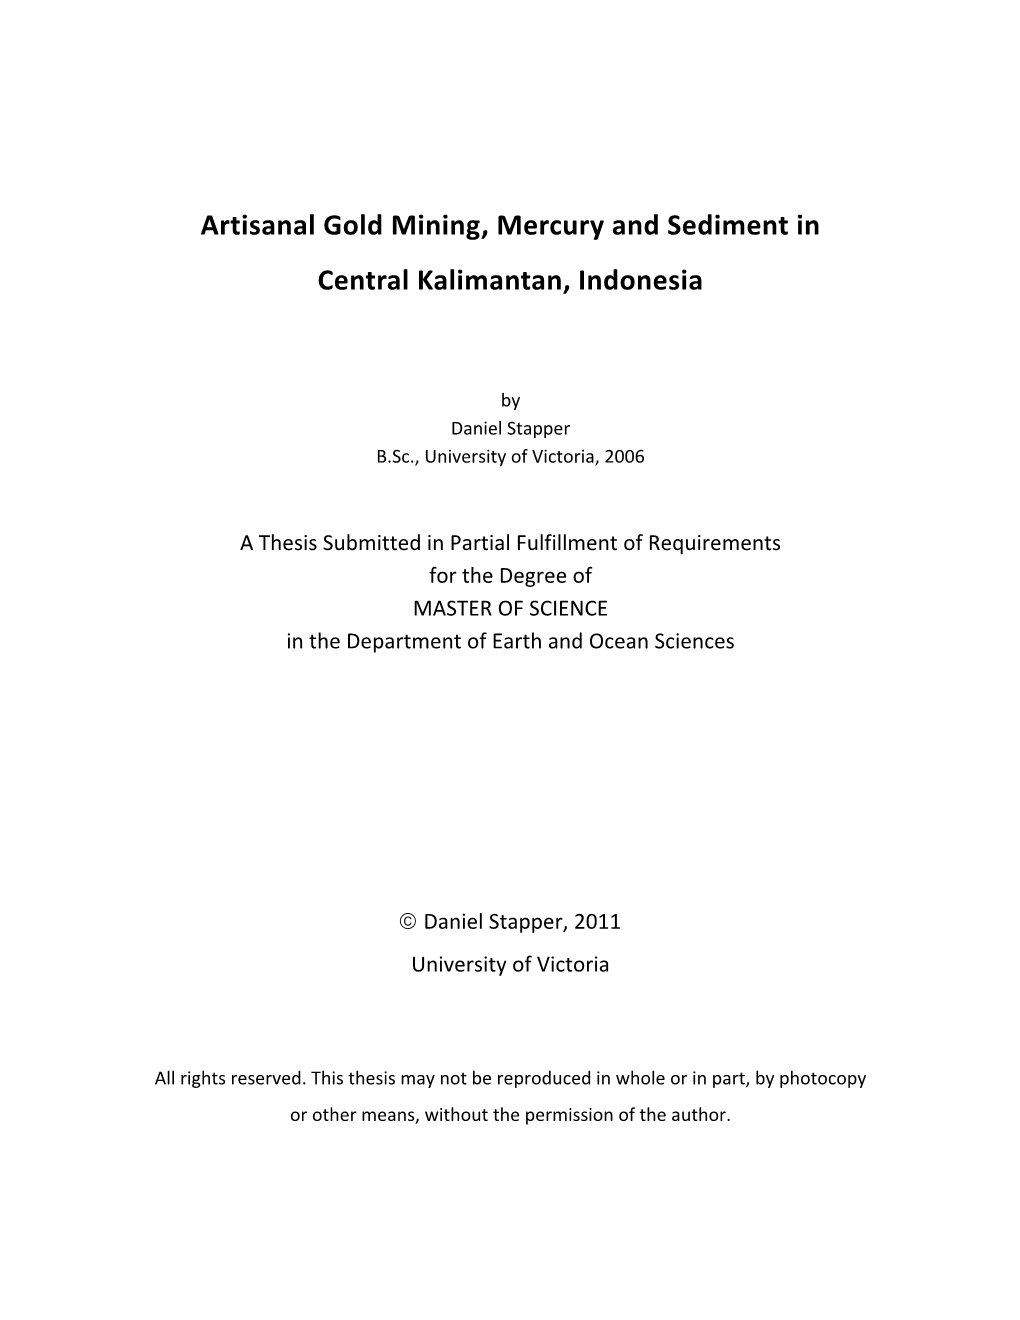 Artisanal Gold Mining, Mercury and Sediment in Central Kalimantan, Indonesia